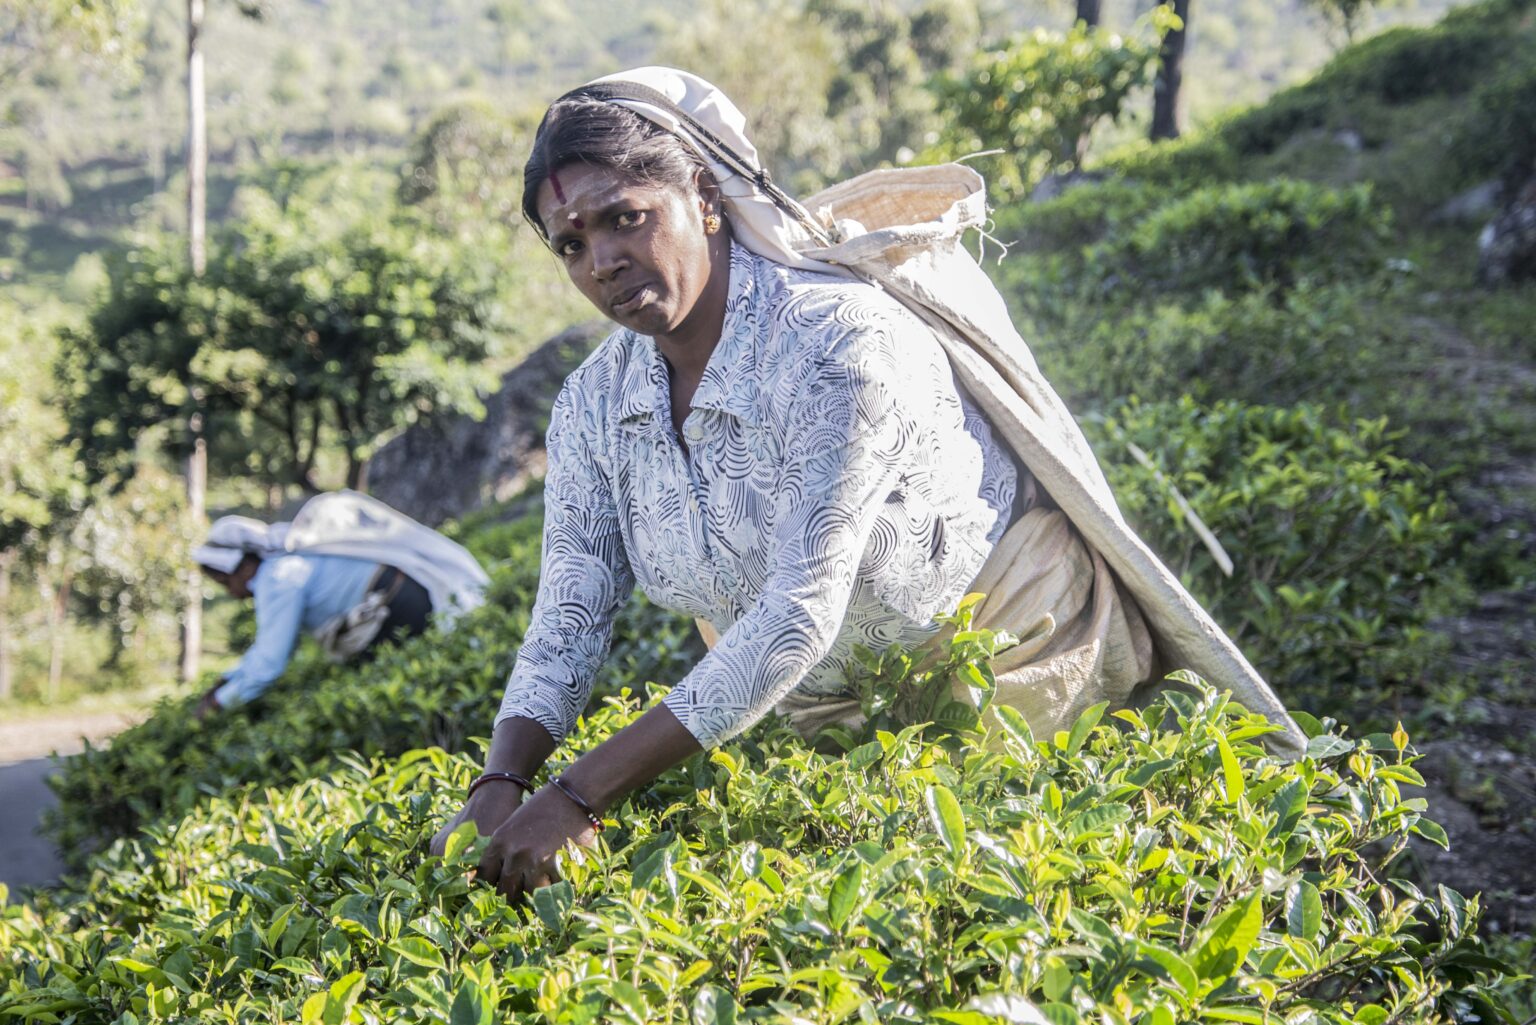 Sri Lanka's tea heritage - Discover the unique hand-plucking process as practiced by local farmers in the tea haven of Nuwara Eliya